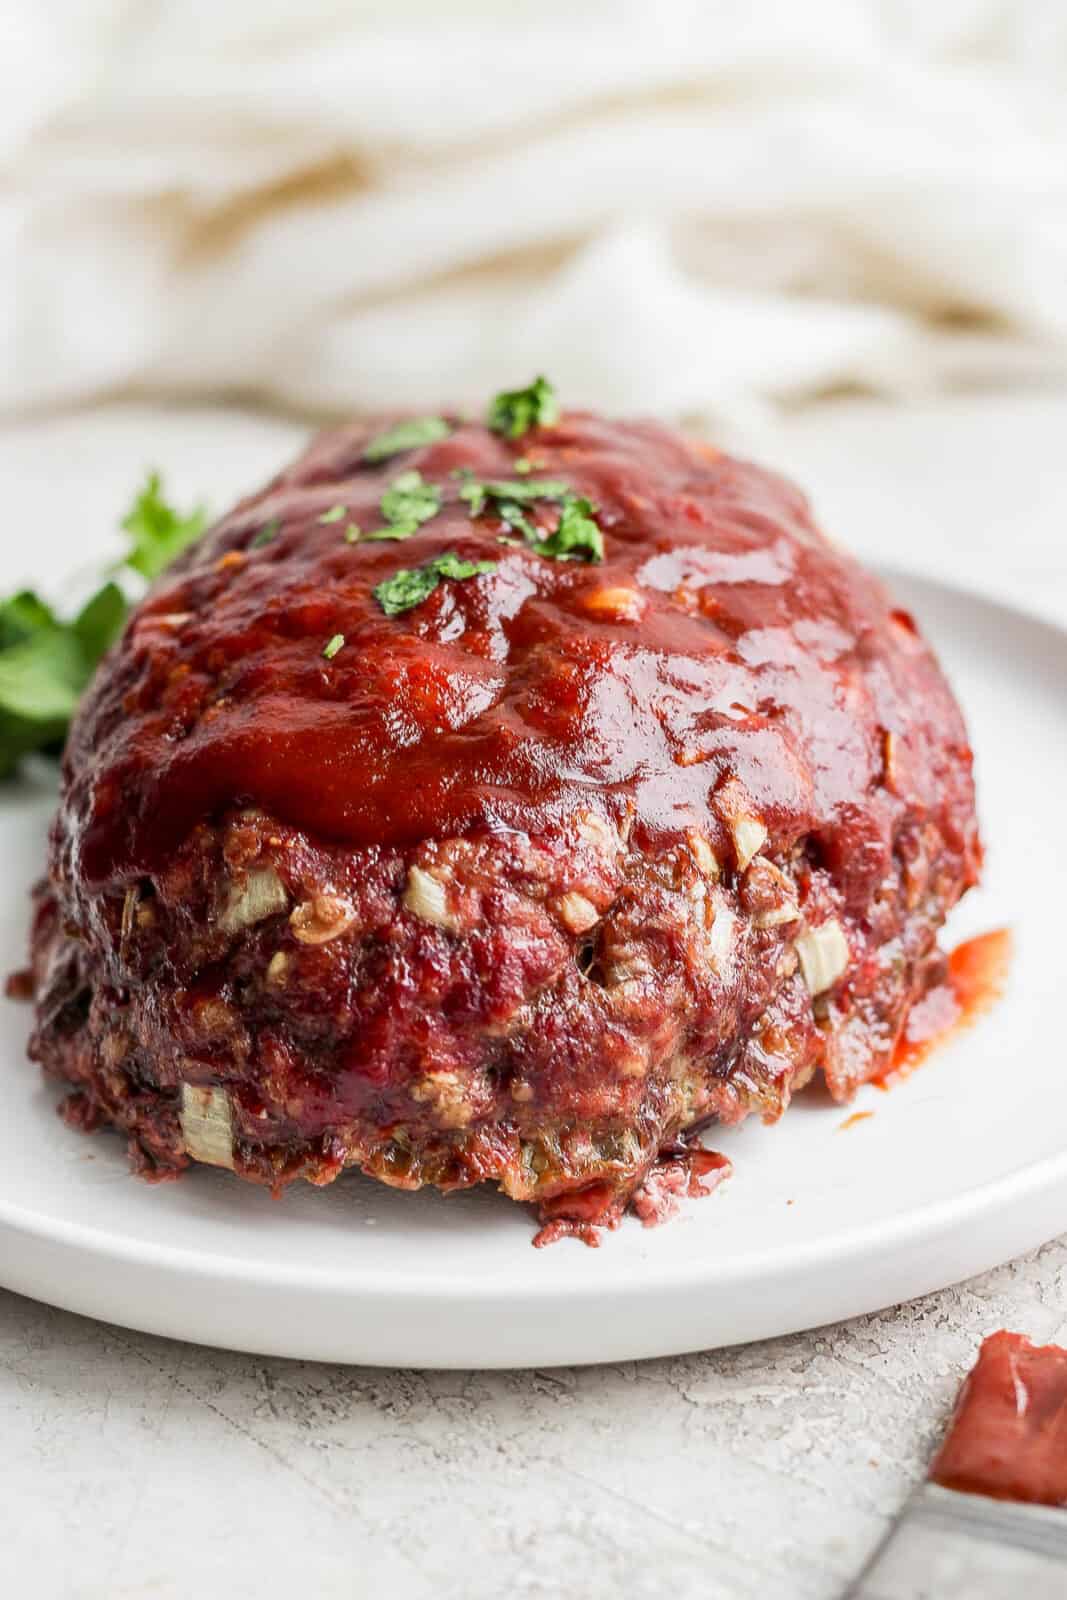 Smoked meatloaf on a plate and garnished with shopped parsley.